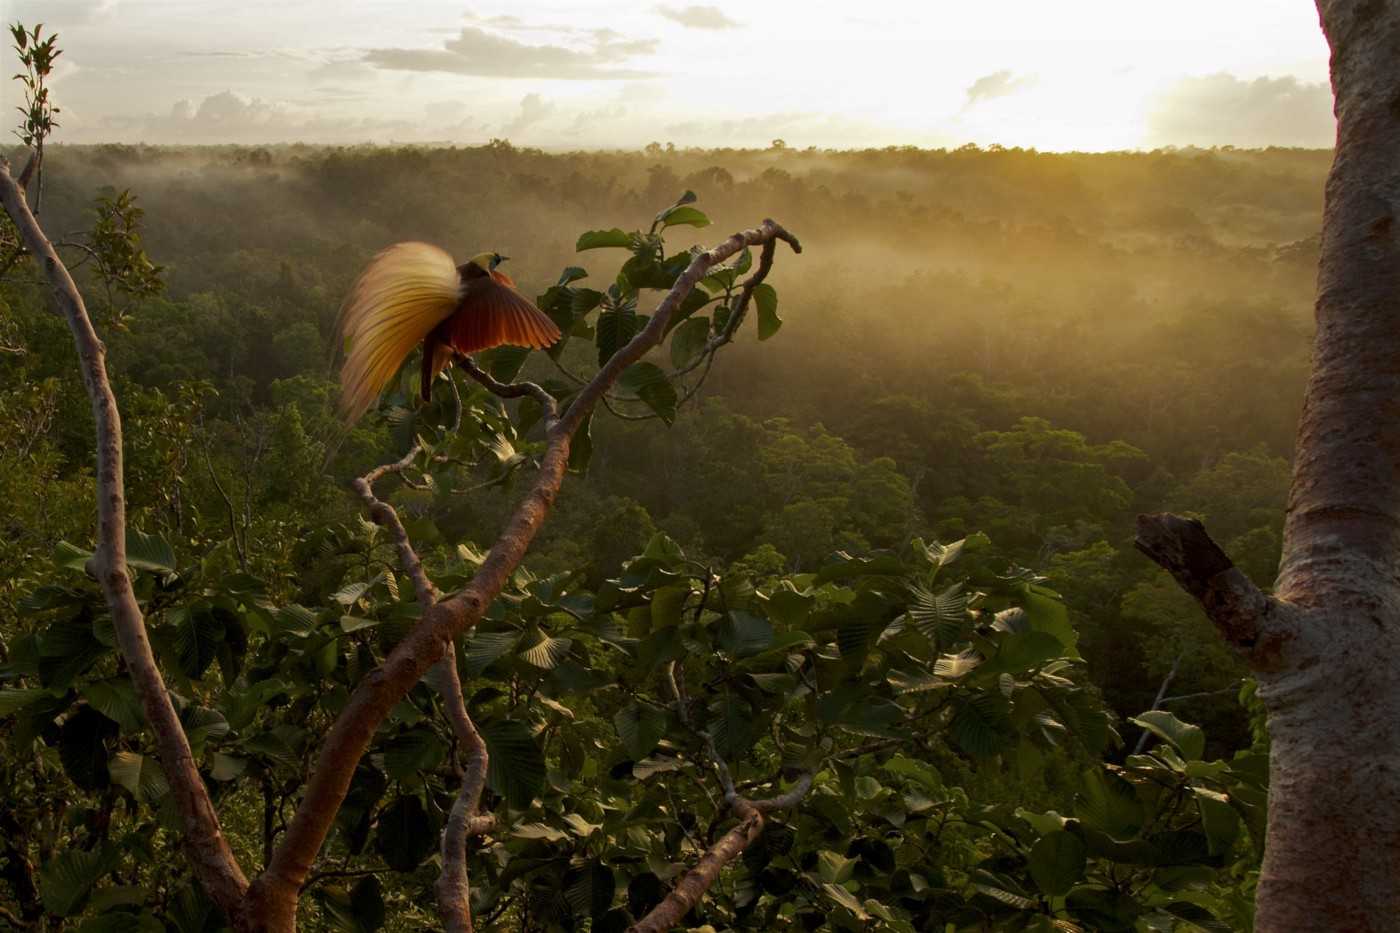 This photo by Tim Laman became an iconic image of the Save Aru campaign. He captured the image as part of his work in the Aru Islands with Cornell Lab of Ornithology Scientist Edwin Scholes and their [Birds-of-Paradise Project](http://www.birdsofparadiseproject.org/).